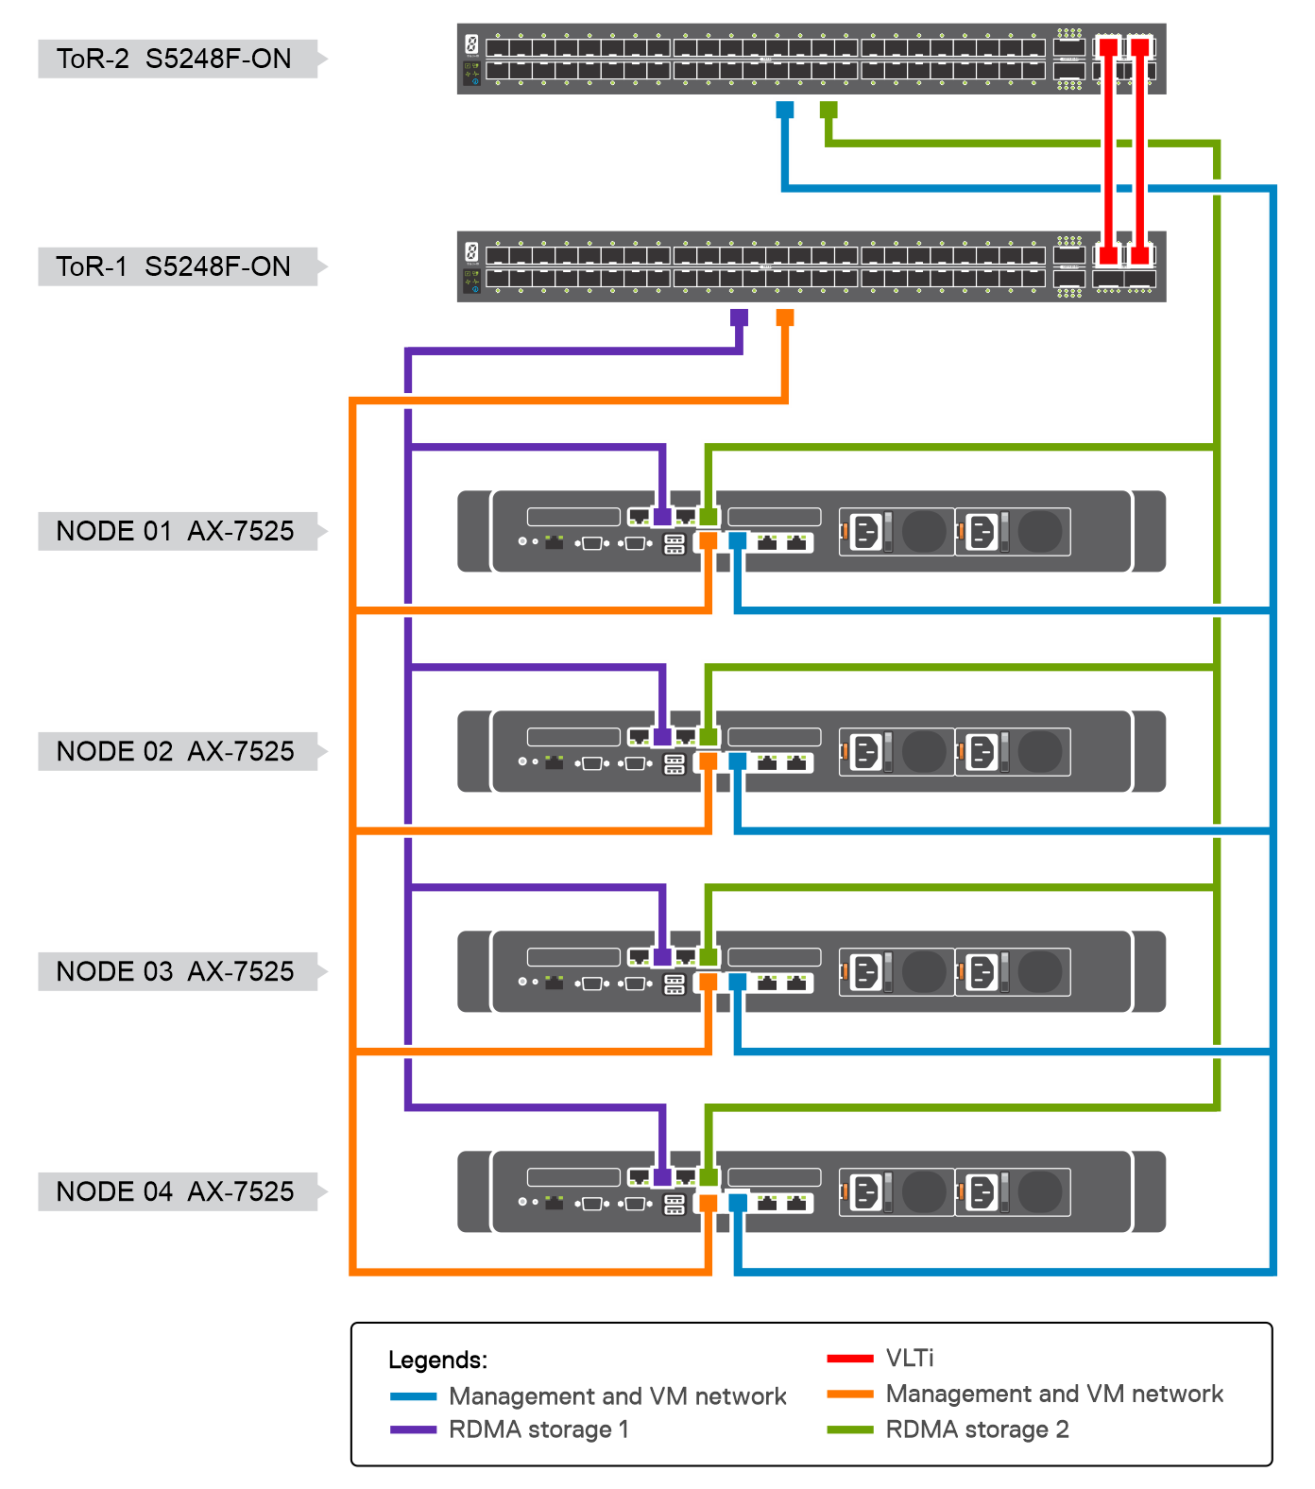 This shows the cluster network architecture including a map of the nodes.